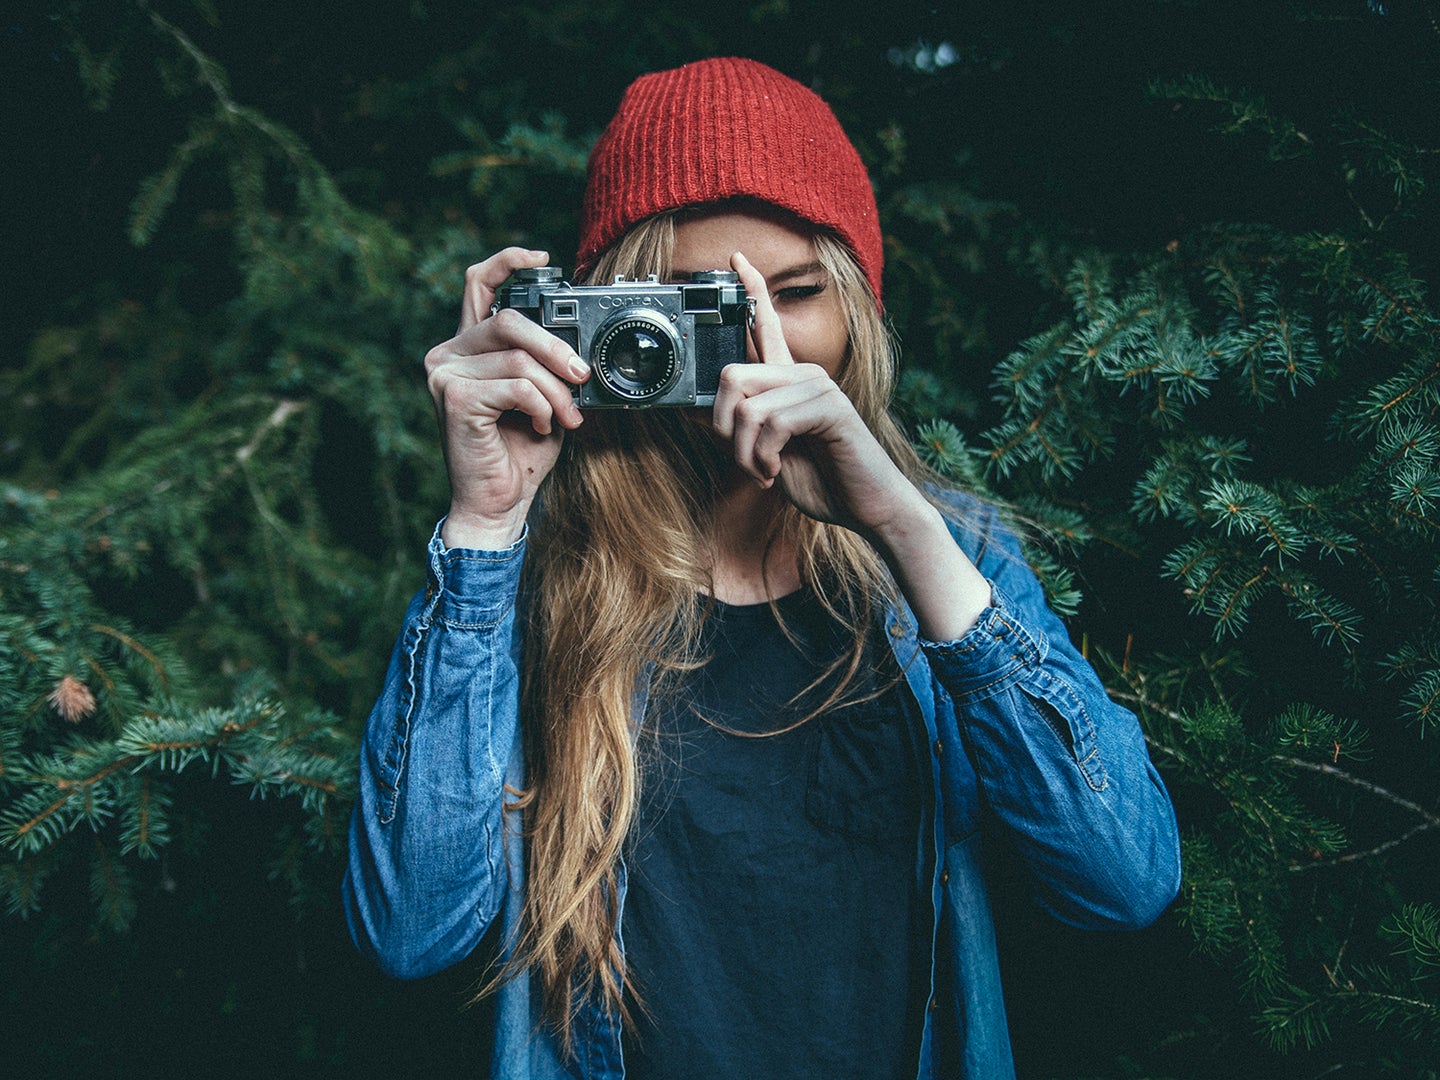 photographer in red hat against evergreen trees